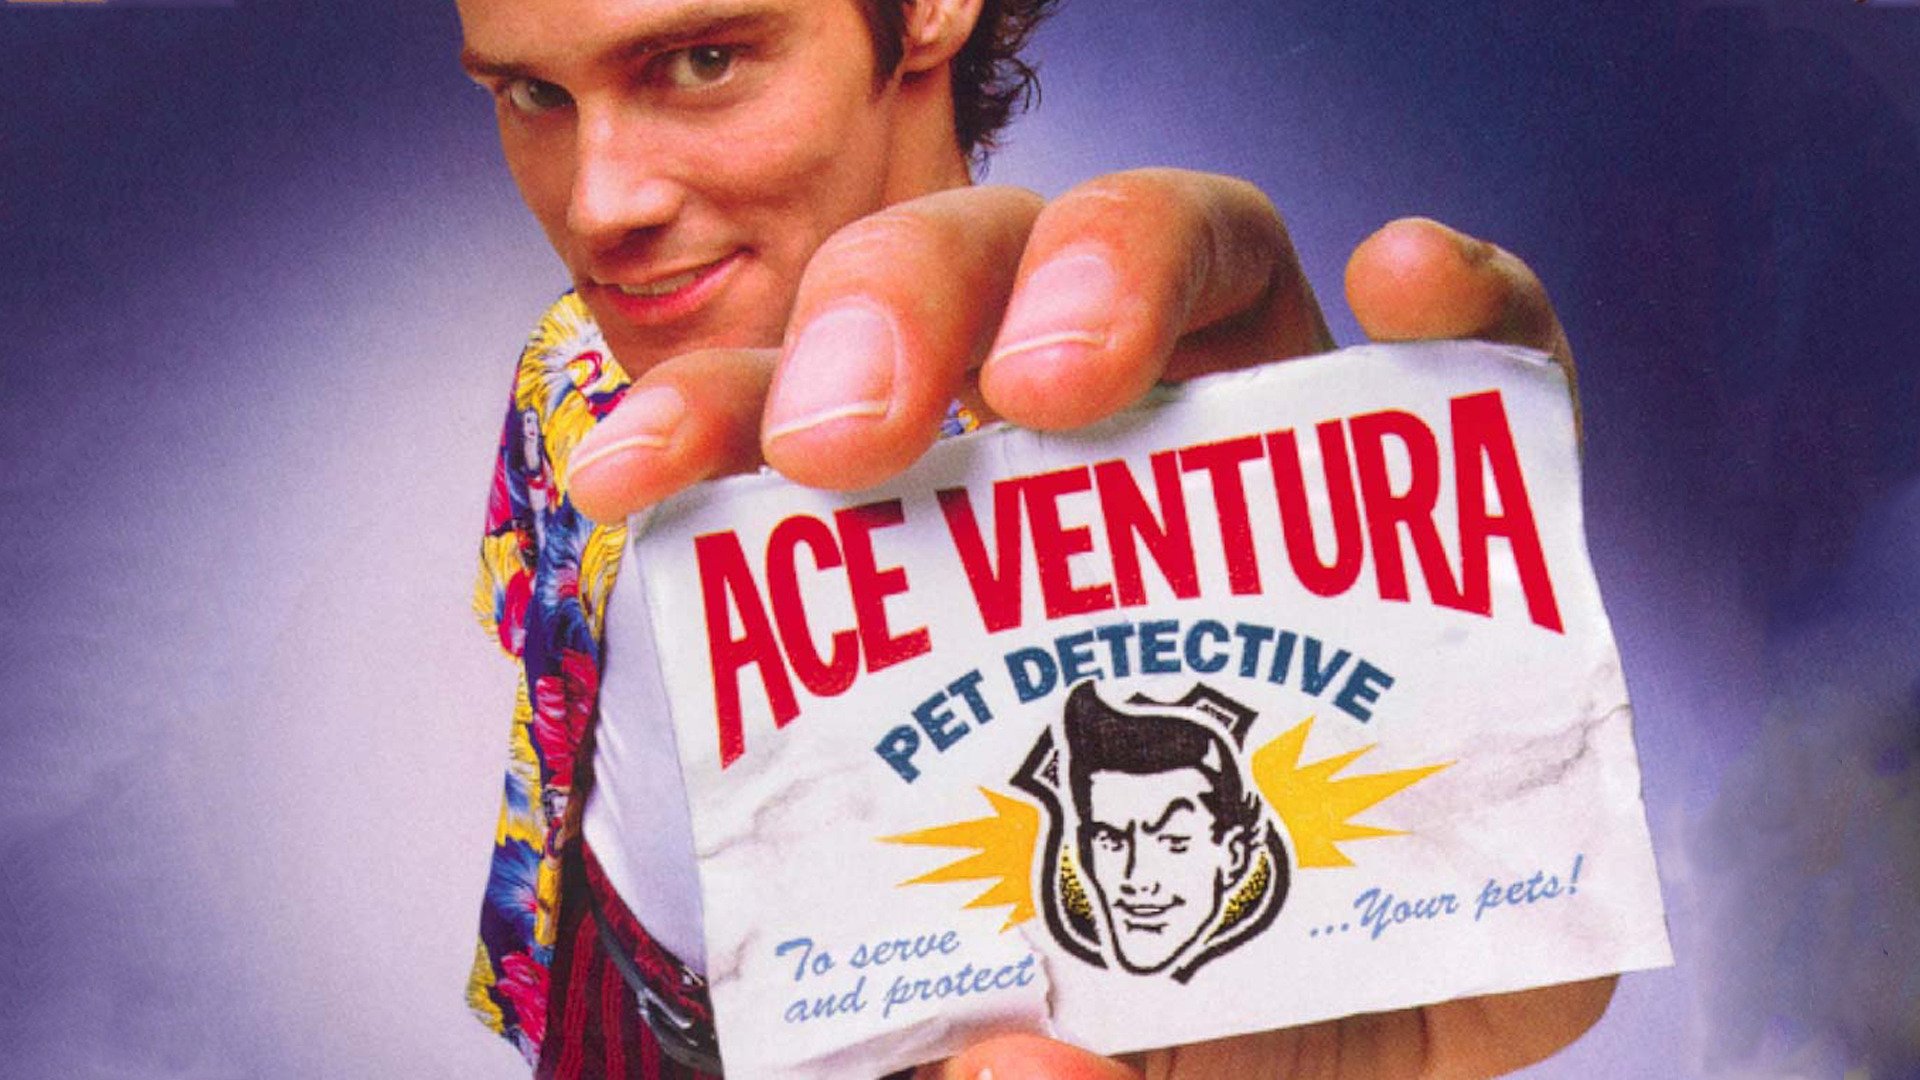 Ace Ventura: Pet Detective Full HD Wallpaper and Background Image